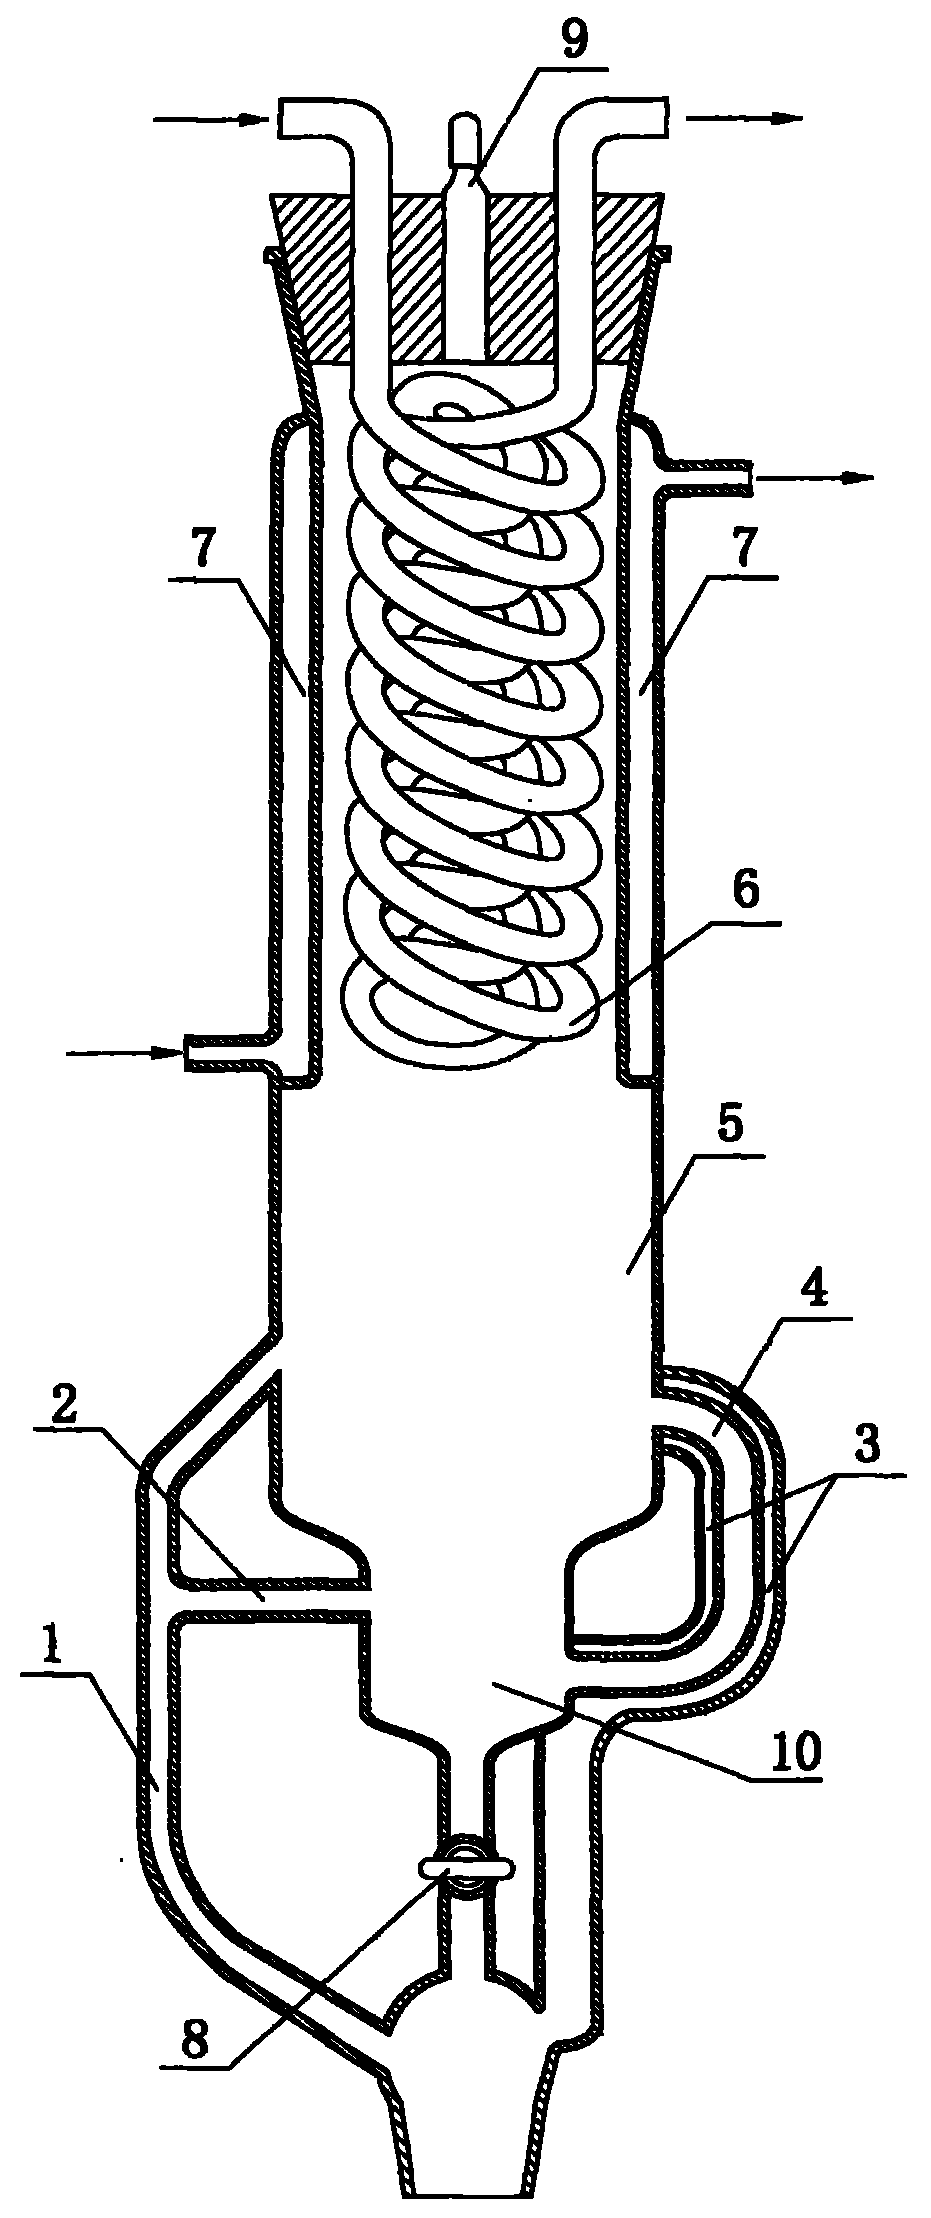 Compact simultaneous distilling and extracting device